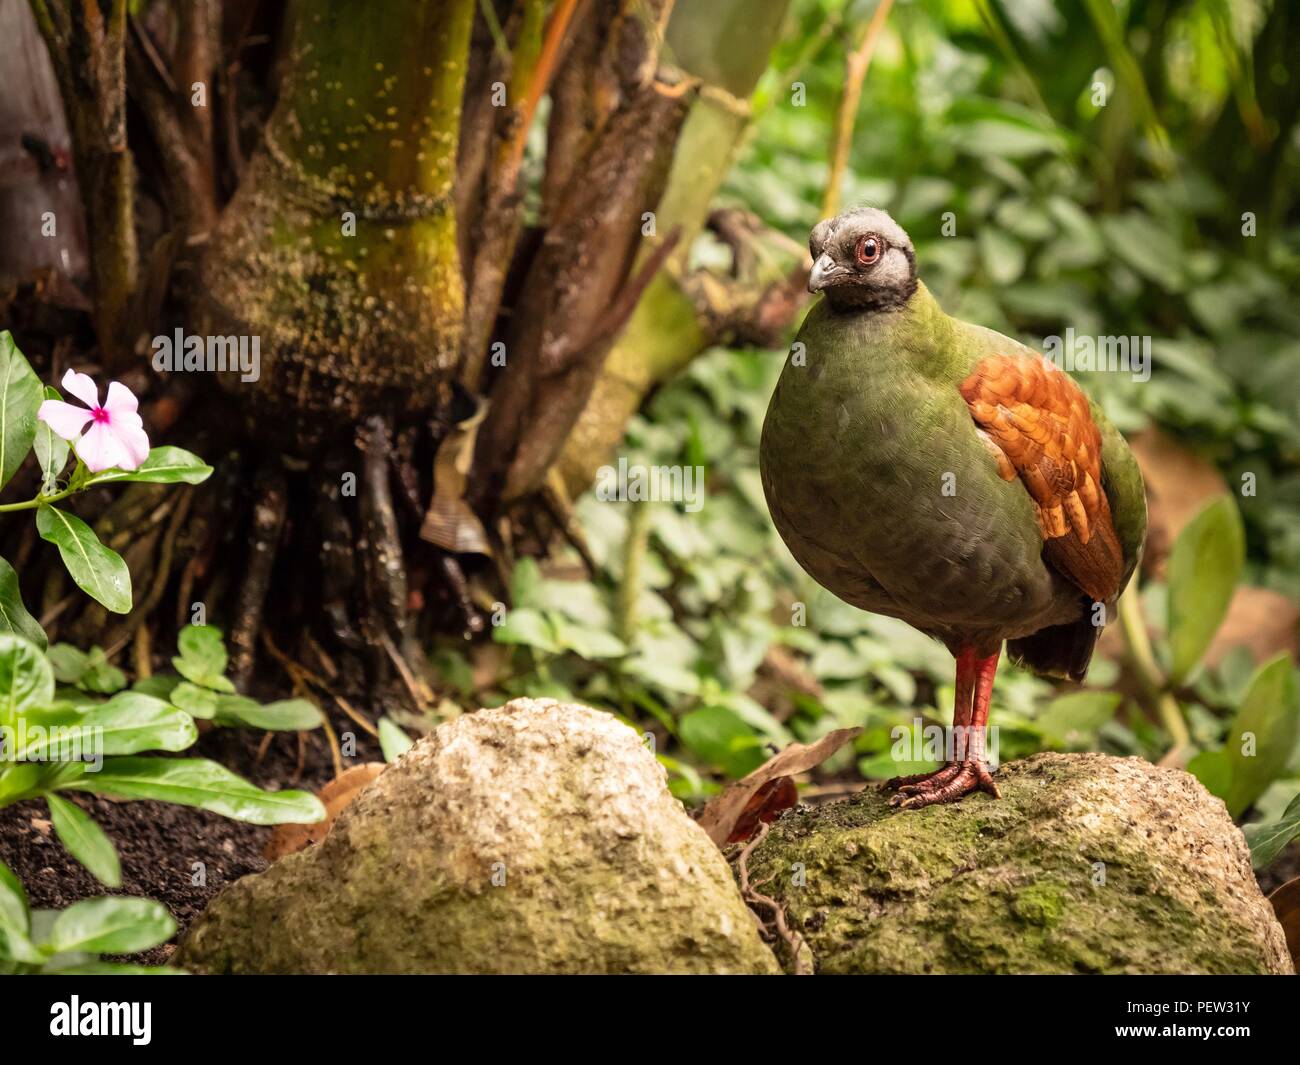 A female crested partridge in a rain forest Stock Photo